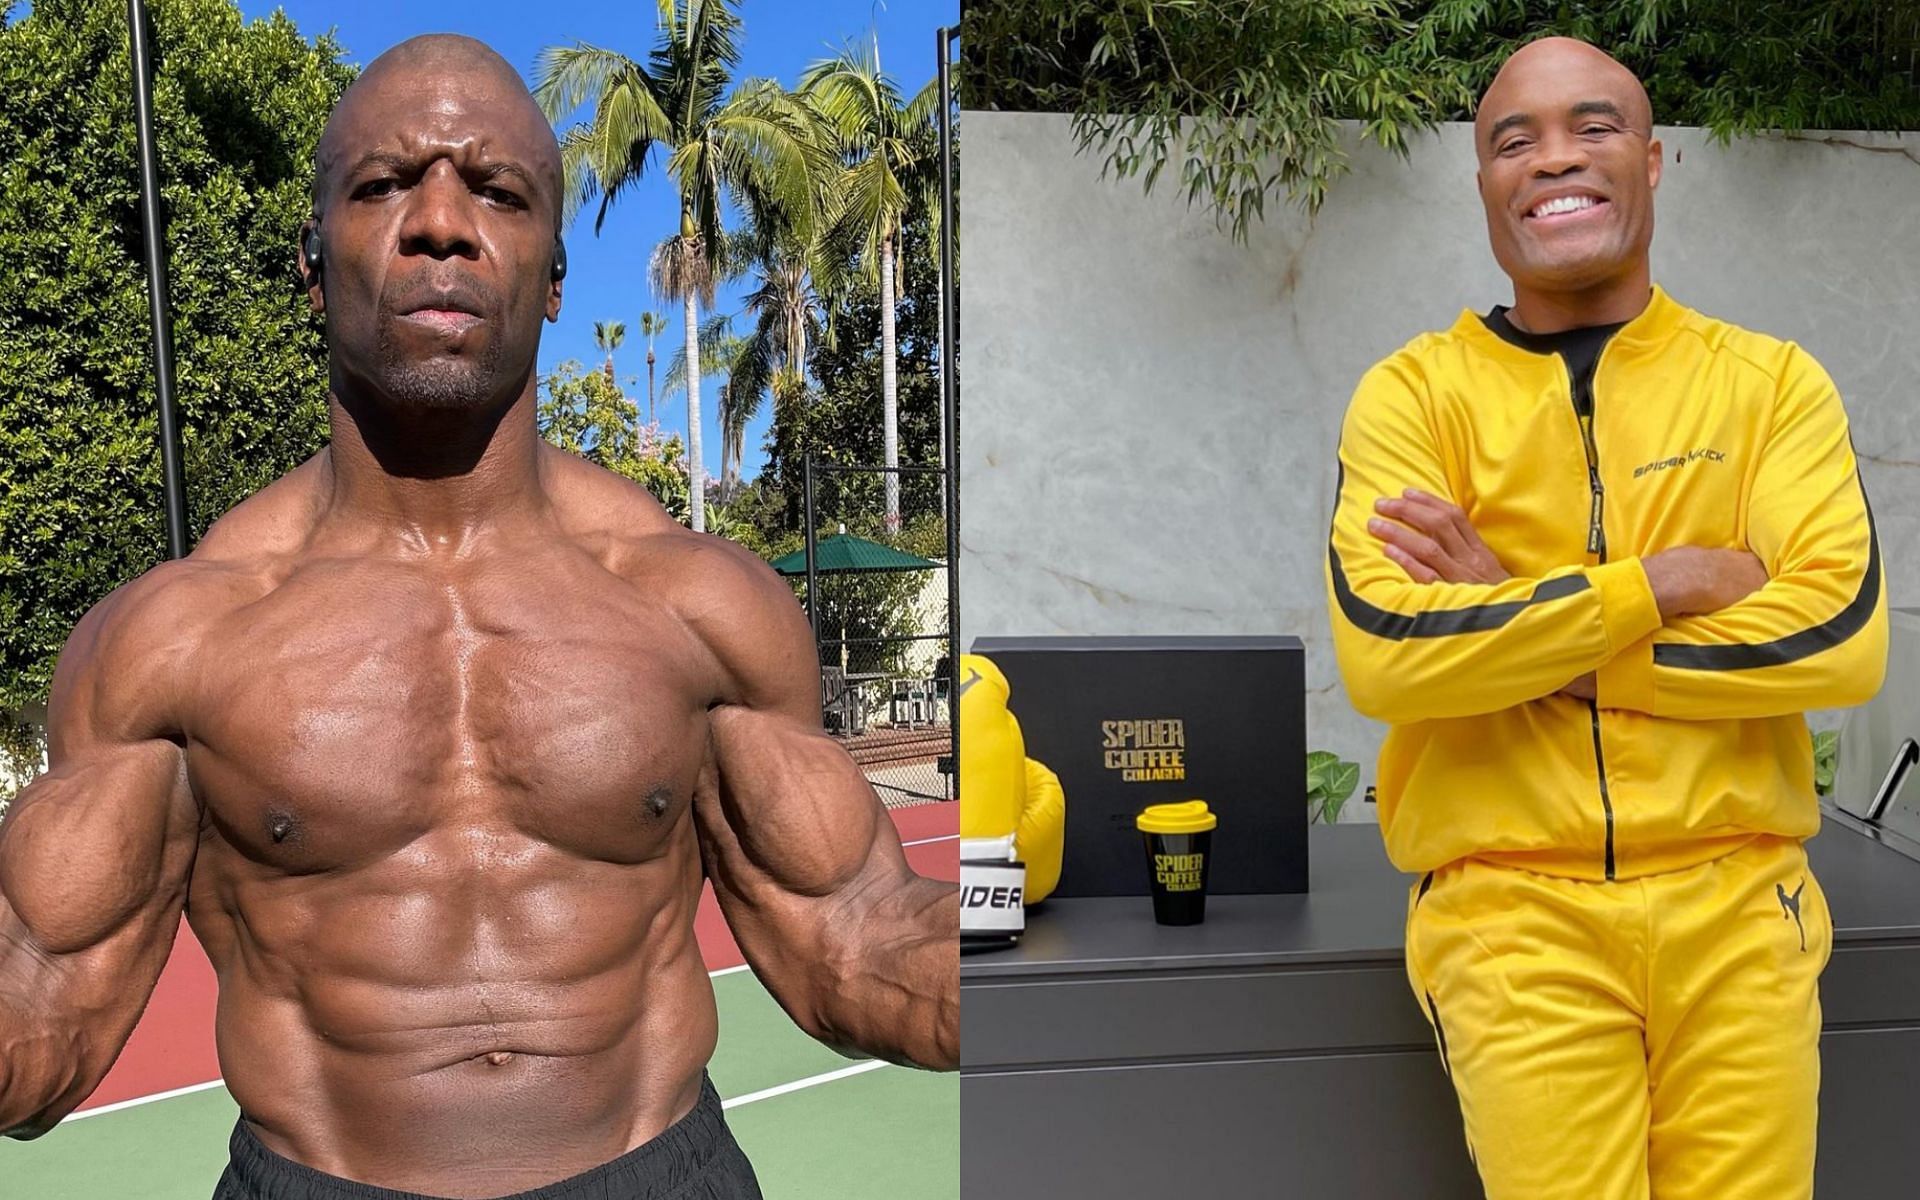 Terry Cruz (left) calls out Anderson Silva (right) for a boxing fight in Brazil [Photo Courtesy @terrycruz and @spiderandersonsilva on Instagram]